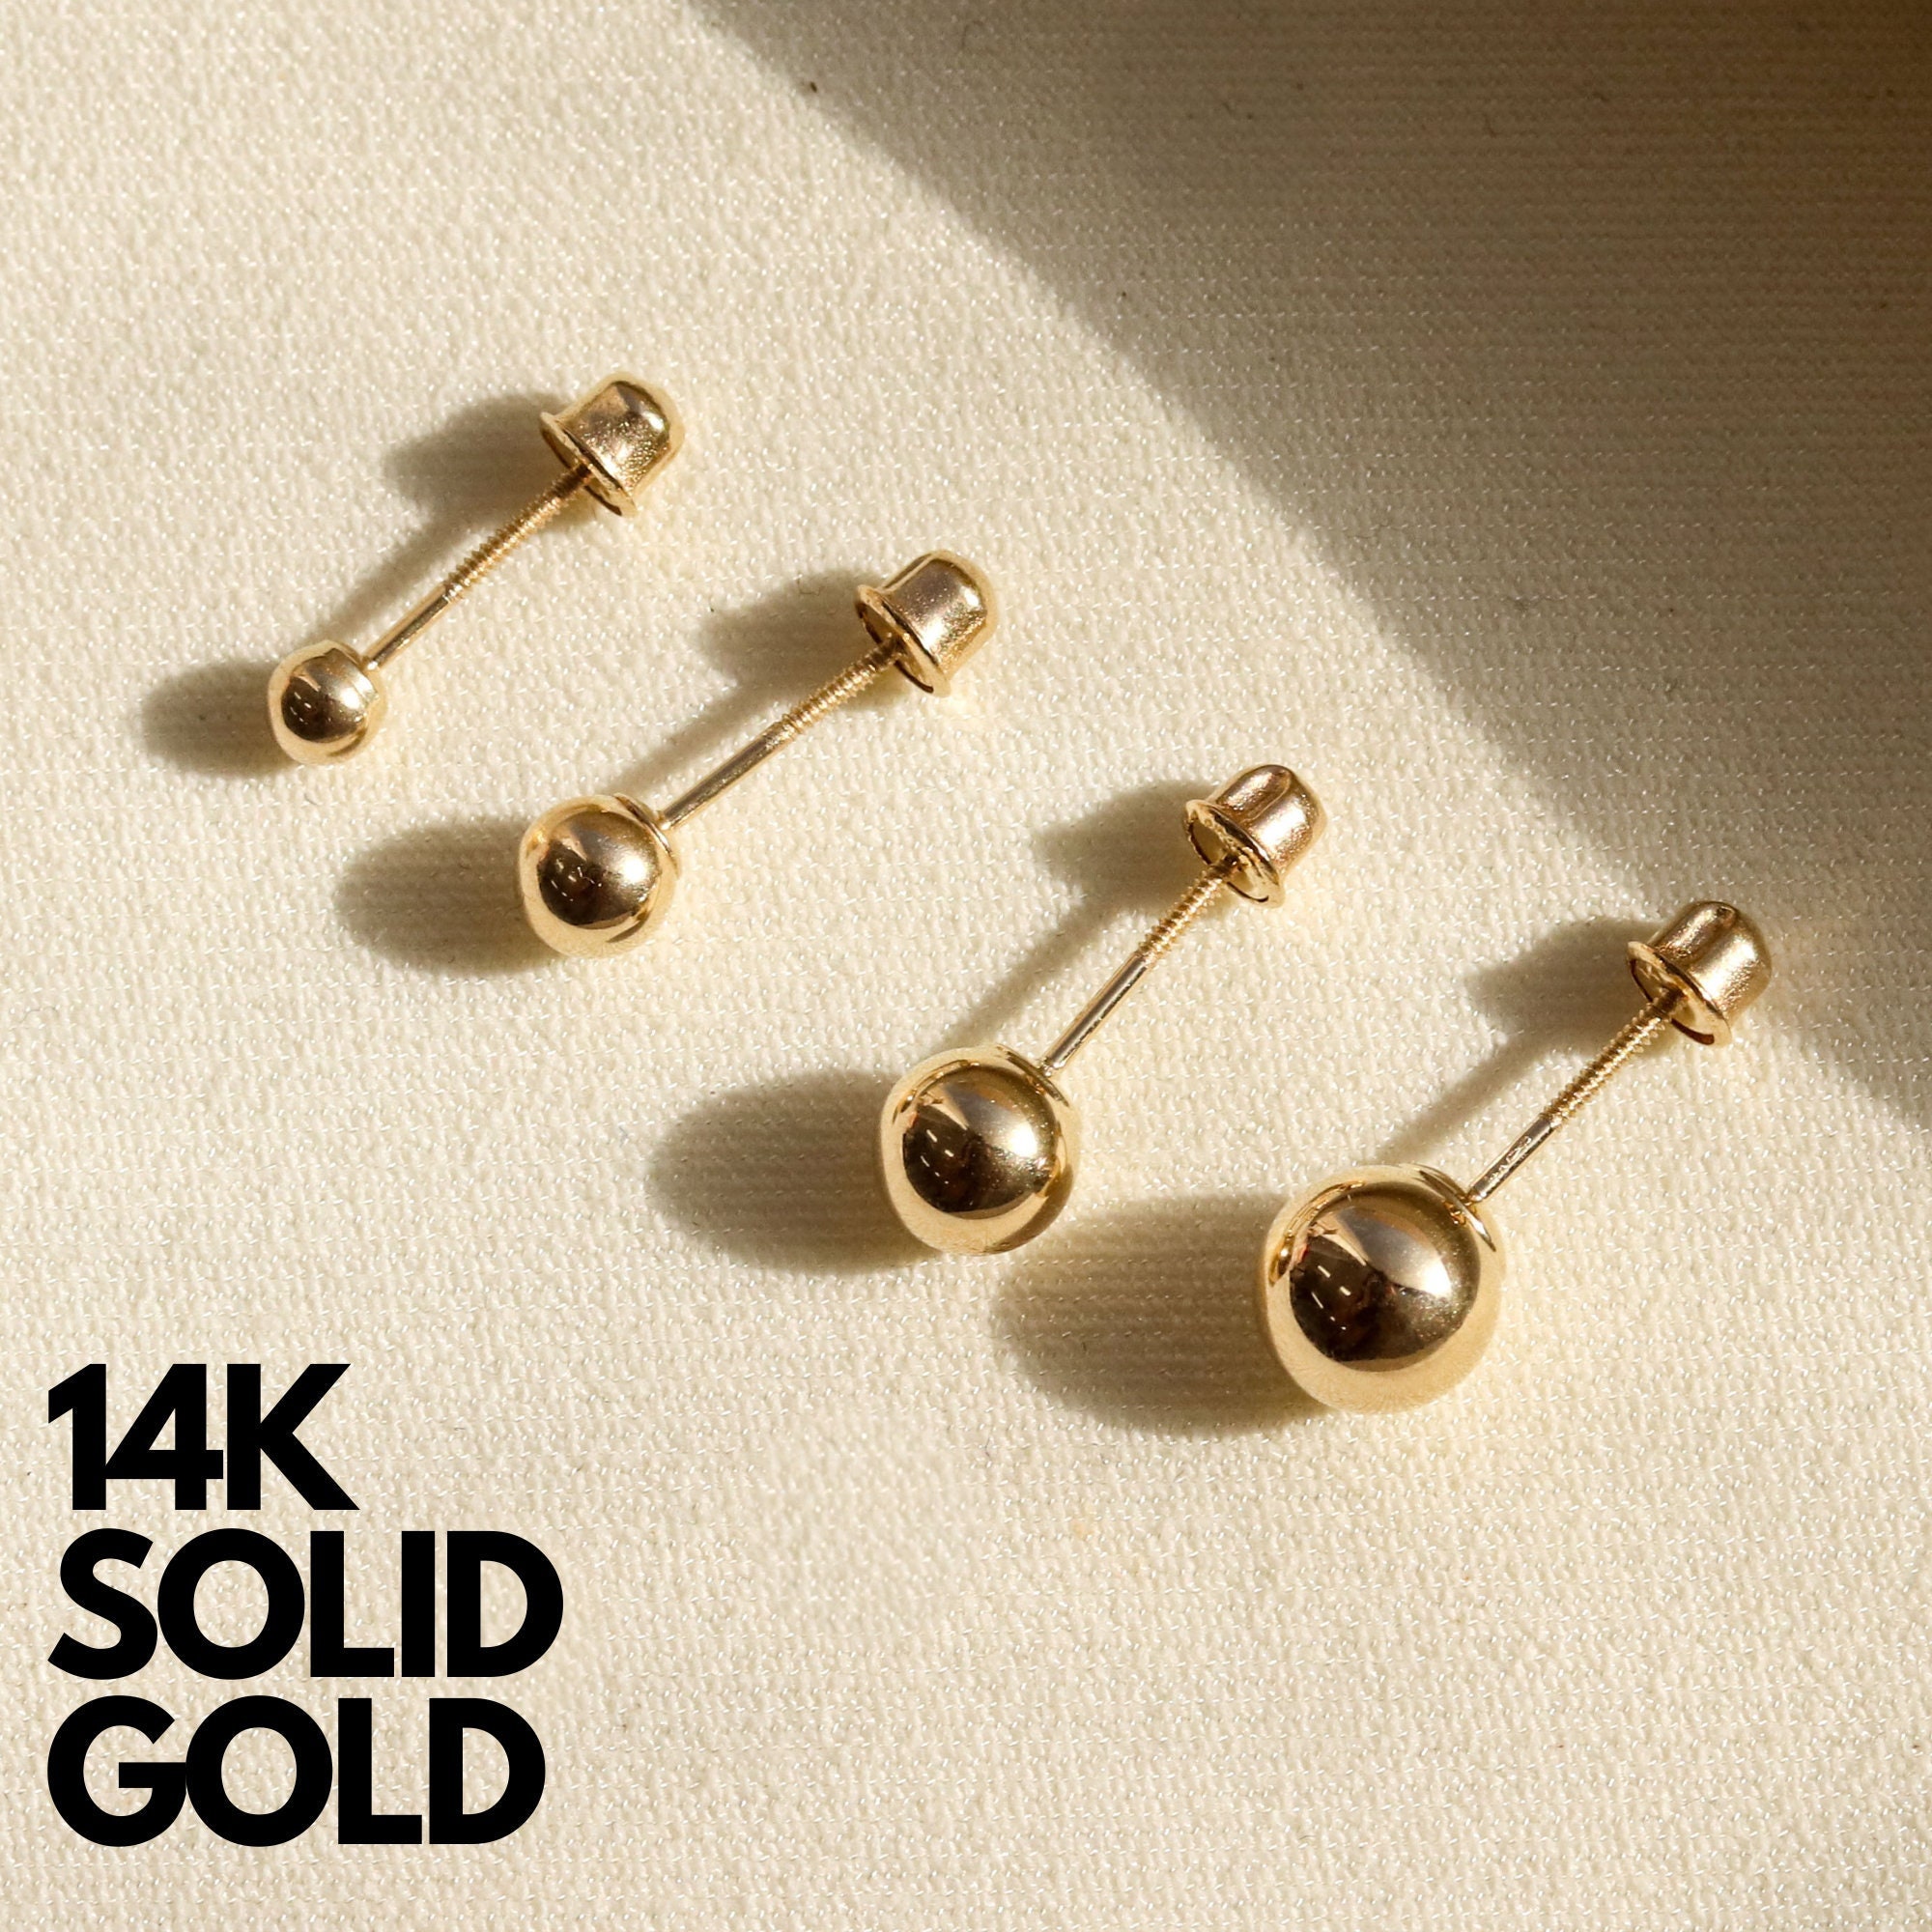 14k Gold Set of Two Monogram Earrings  Anthropologie Singapore - Women's  Clothing, Accessories & Home